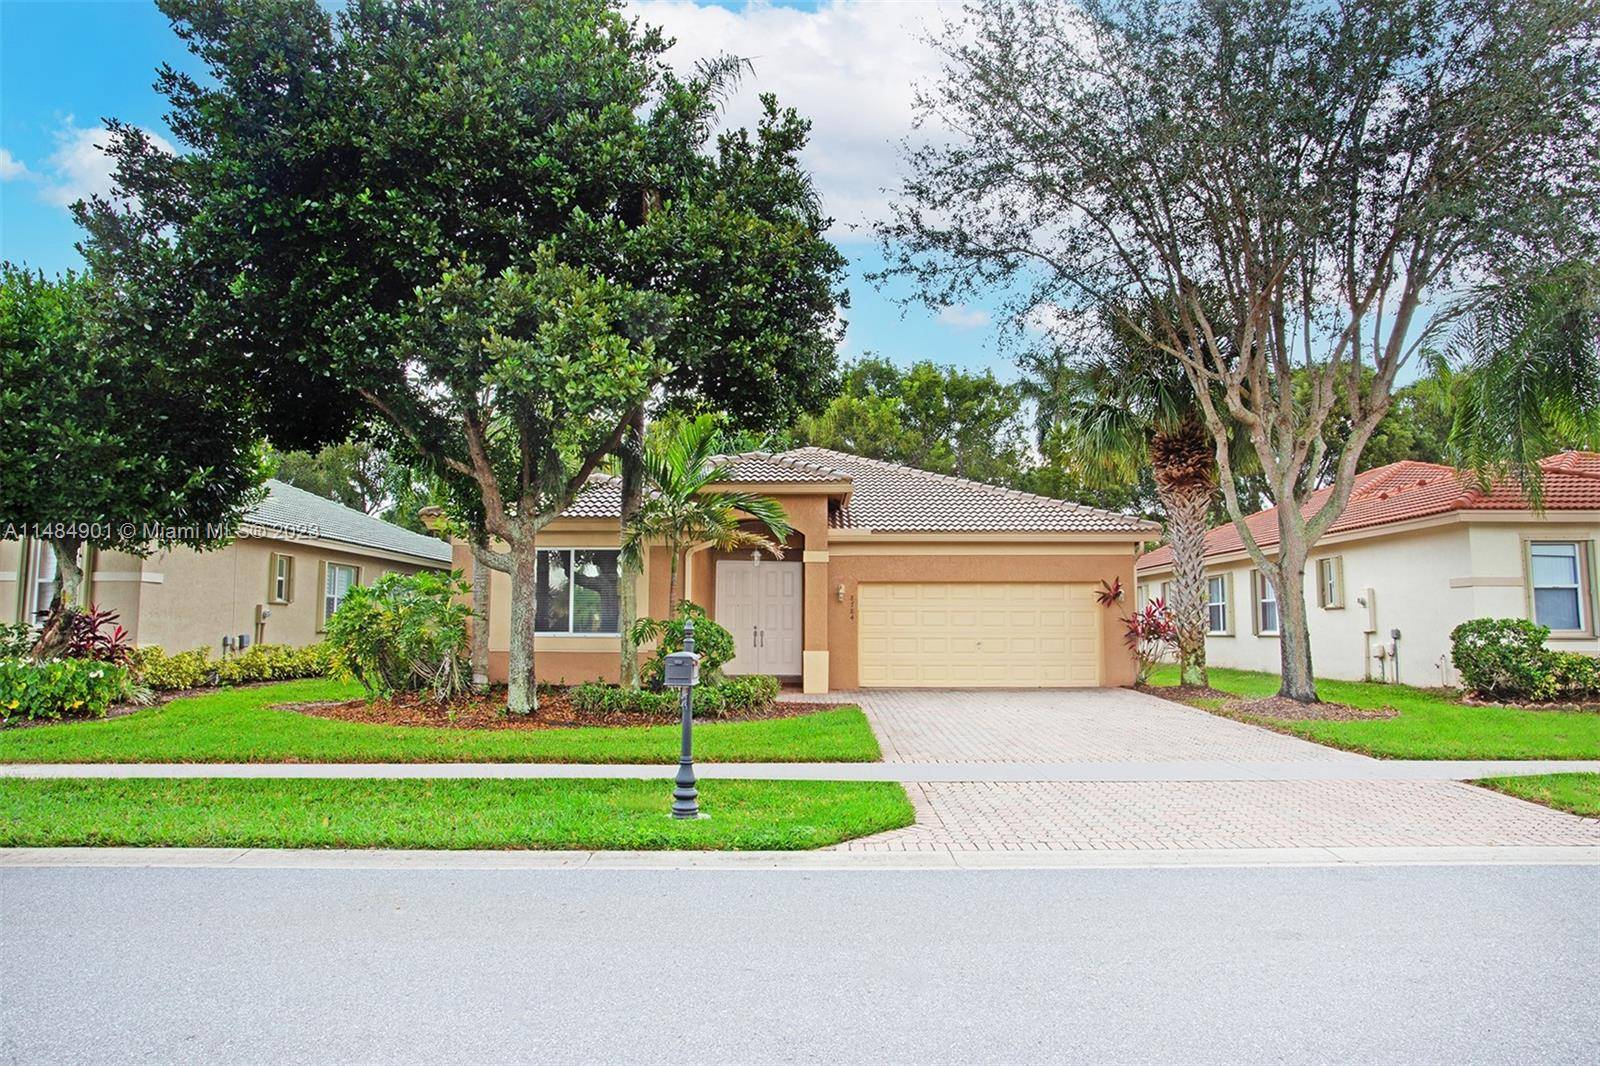 NOW'S YOUR CHANCE TO OWN THIS WELL MAINTAINED AND BEAUTIFUL HOME WITH NEW ROOF IN VENETIAN ISLES 55 COMMUNITY.